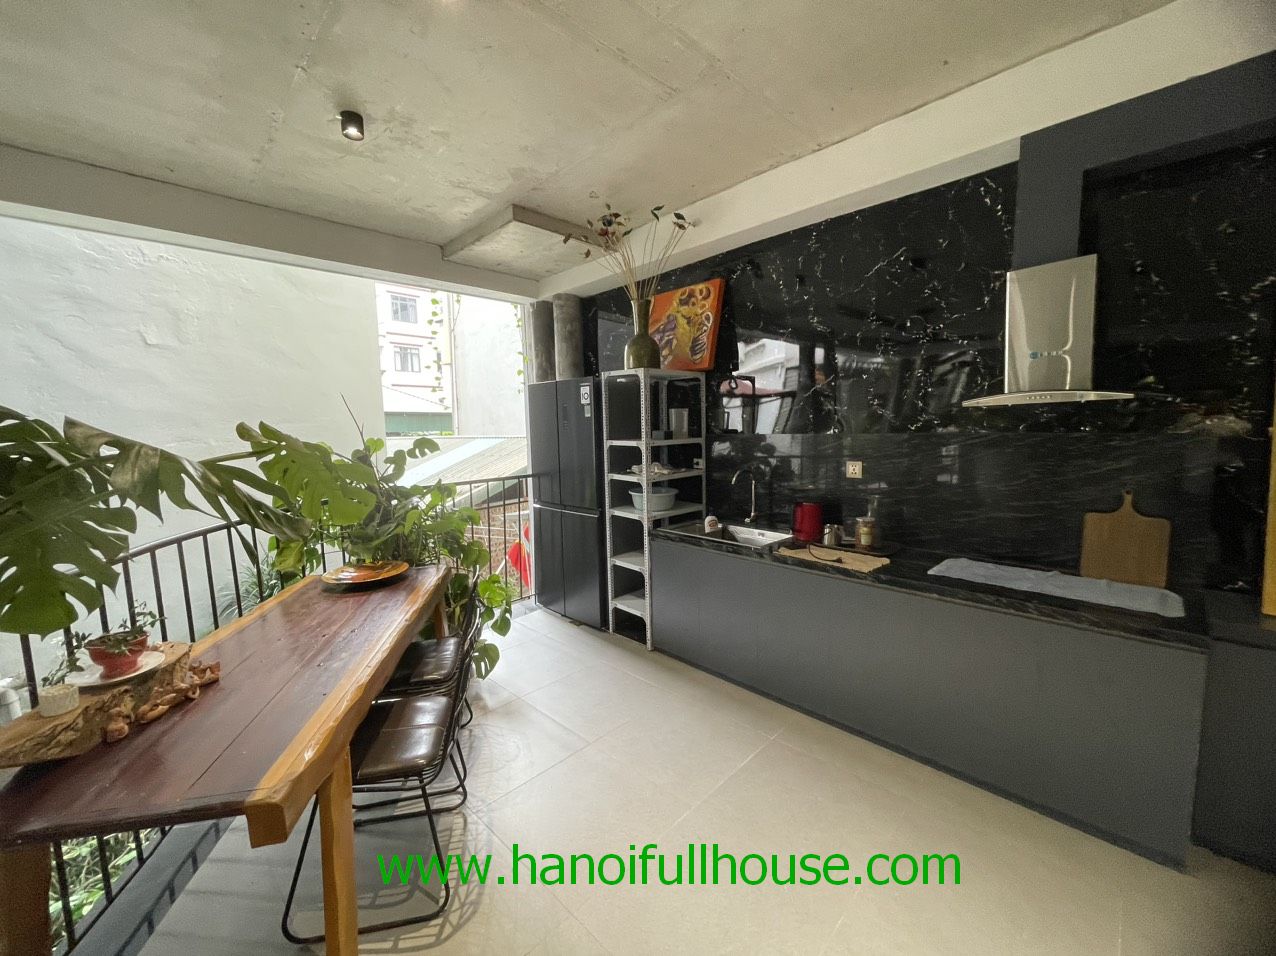 Lovely 1 bedroom apartment on Au Co street with lots of light for rent